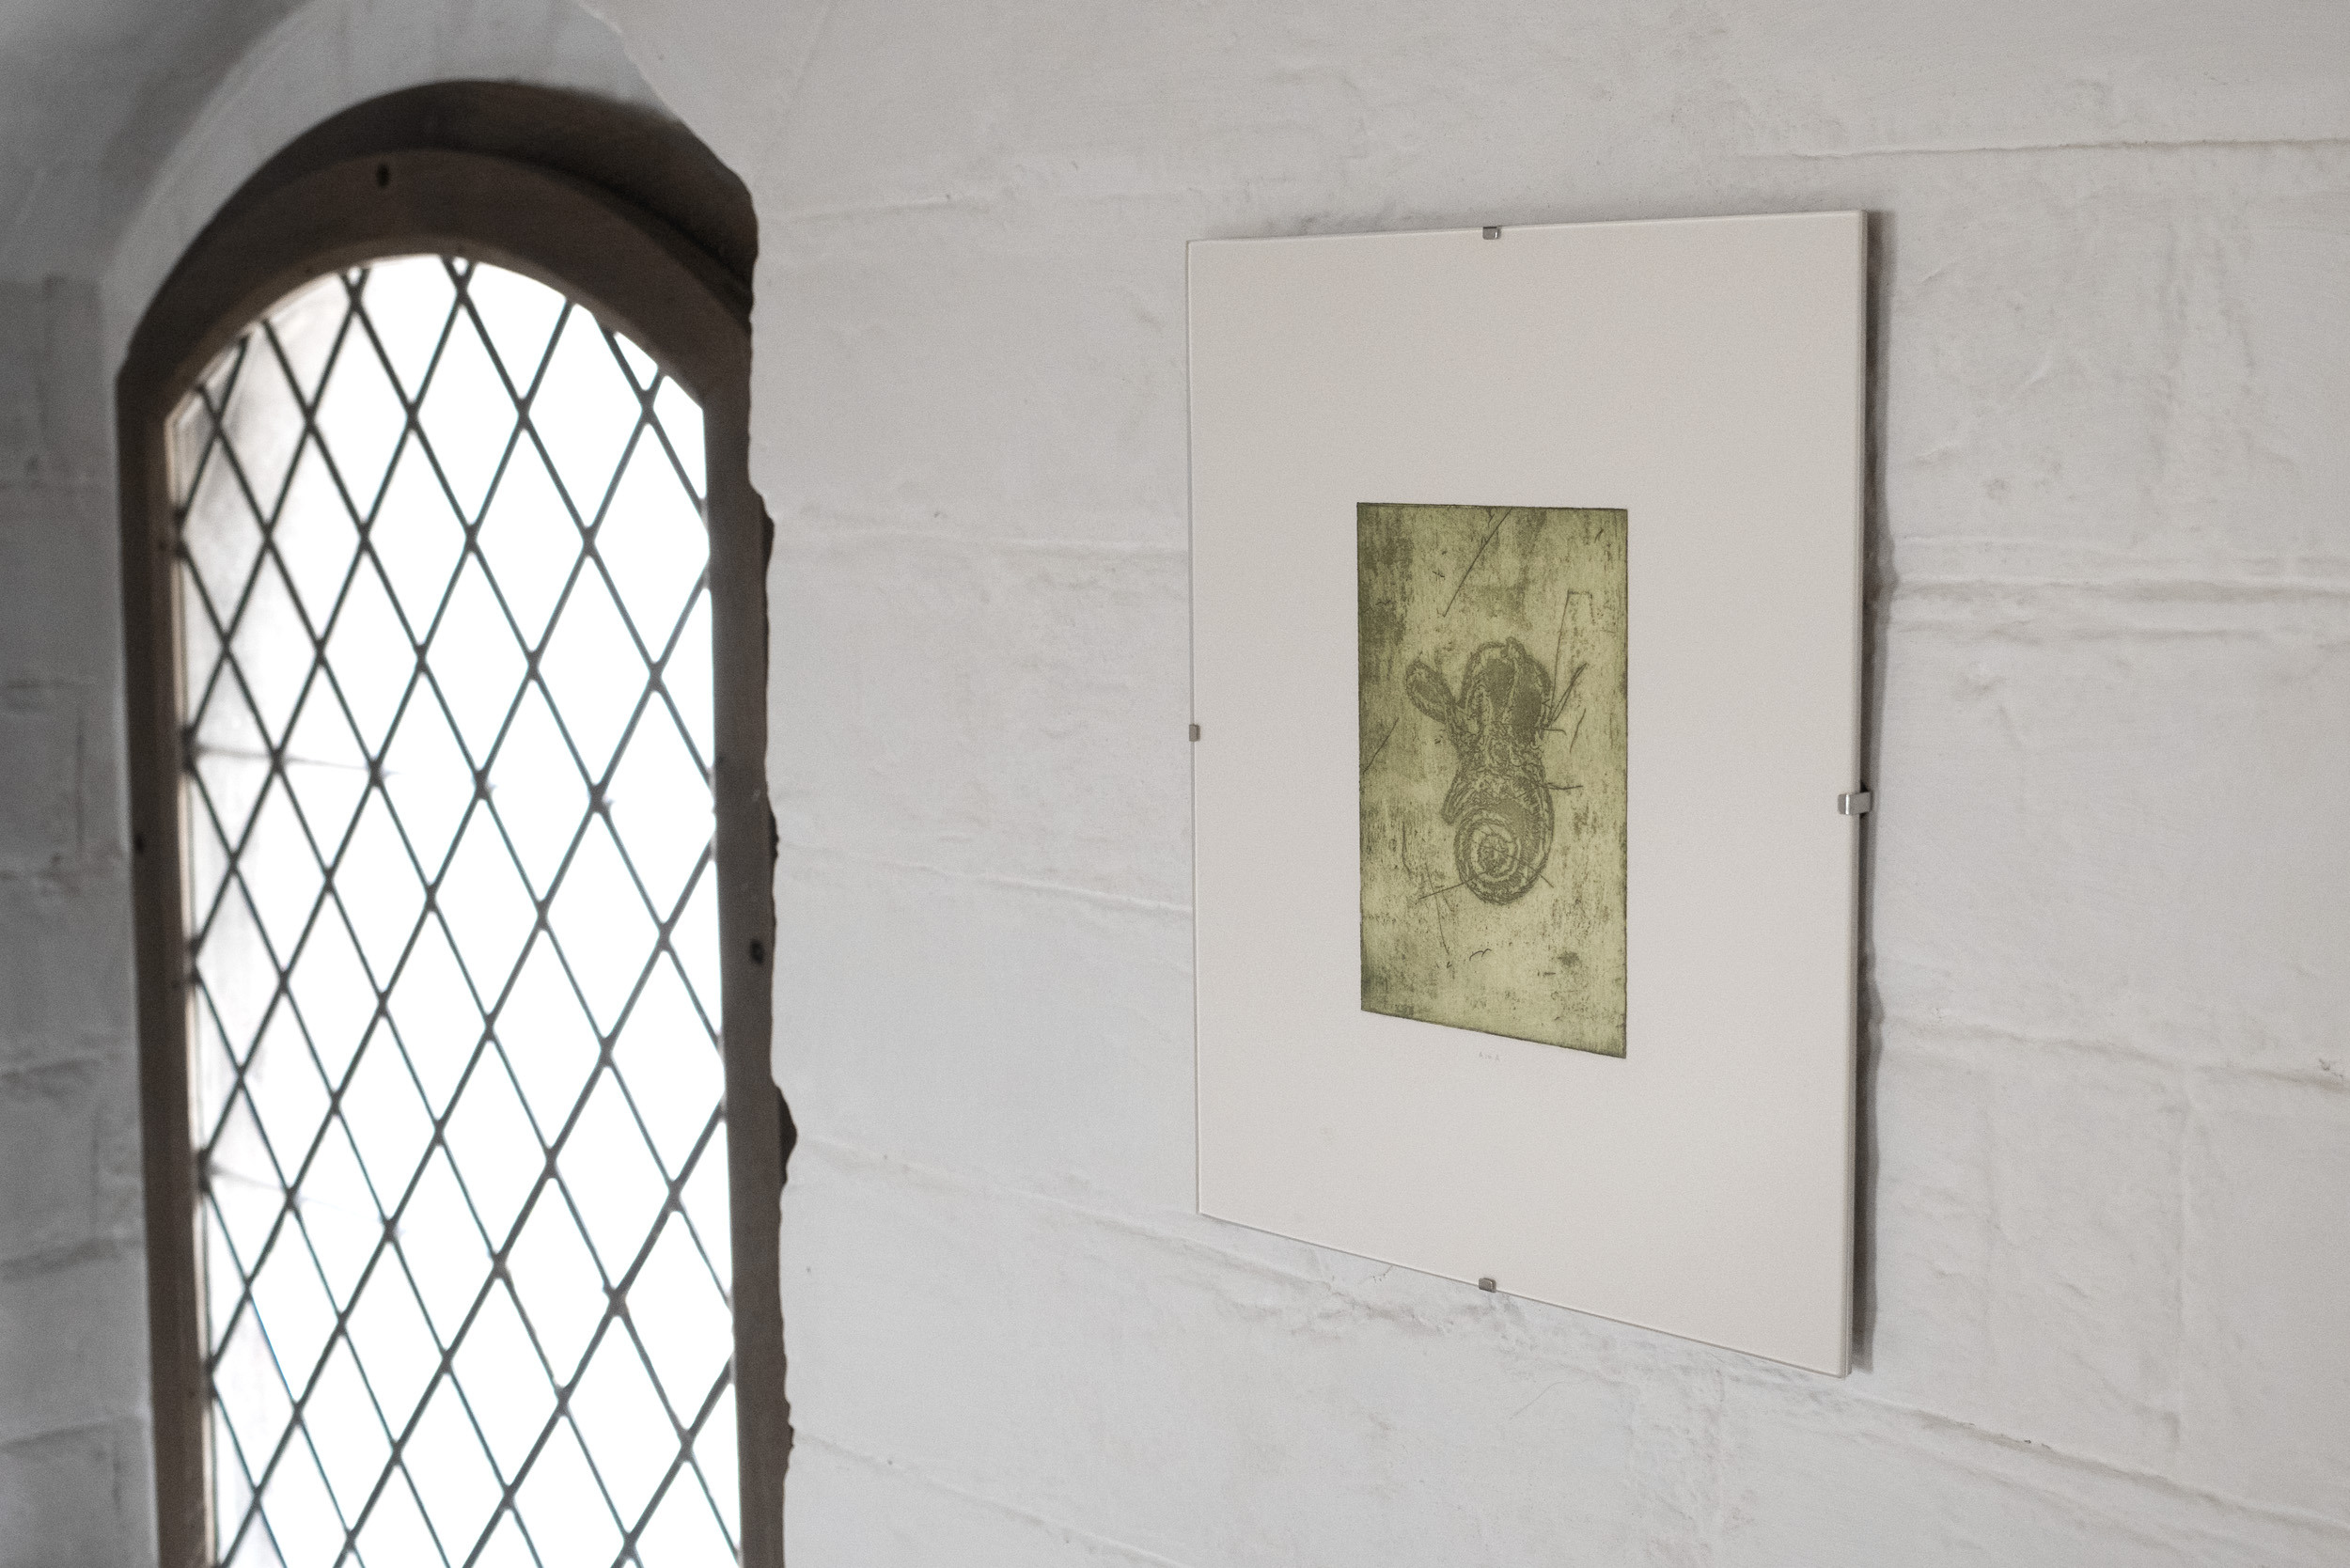 Anders Aarvik, untitled (inner ear machine fossil sigil), Etching, water-based ink and soil, cotton paper retrieved from deceased artist, plotting with GraphGear 1000, found clip frame, 3x 24x30 cm each